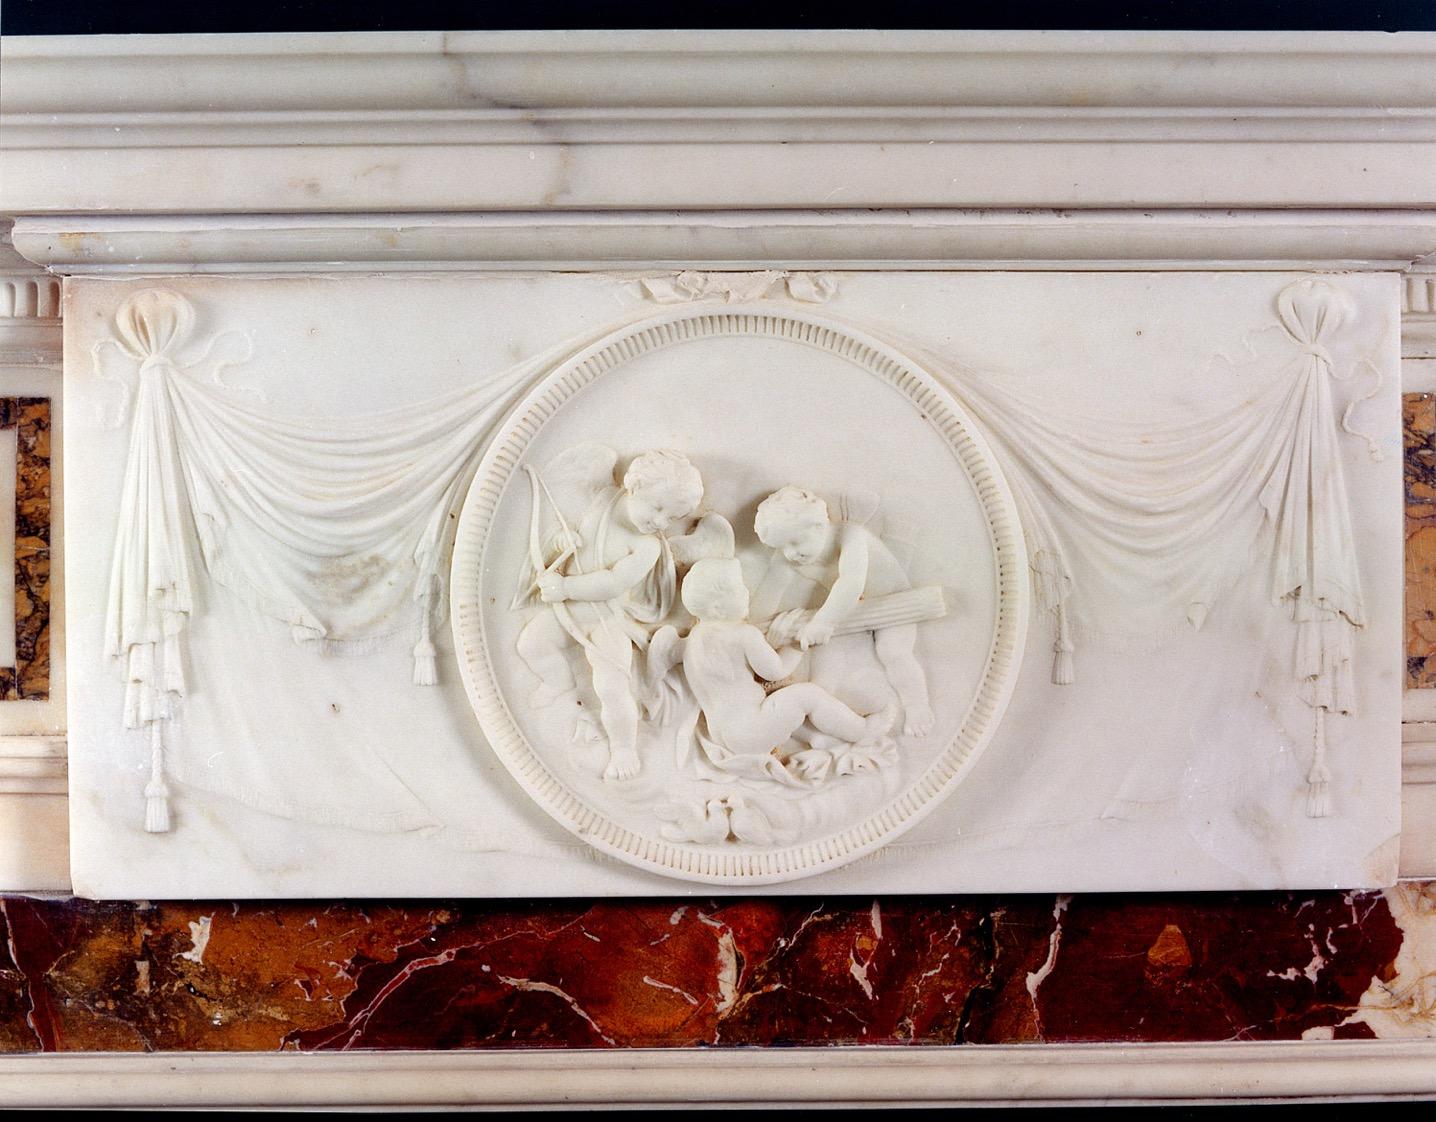 An 18th century English marble statuary fireplace with inlaid sienna marble Greek key inlay to side panels, carved centre tablet with putti and drapery, and jambs comprising tapered columns surmounted by Ionic capitals. Inlaid Jasper border and